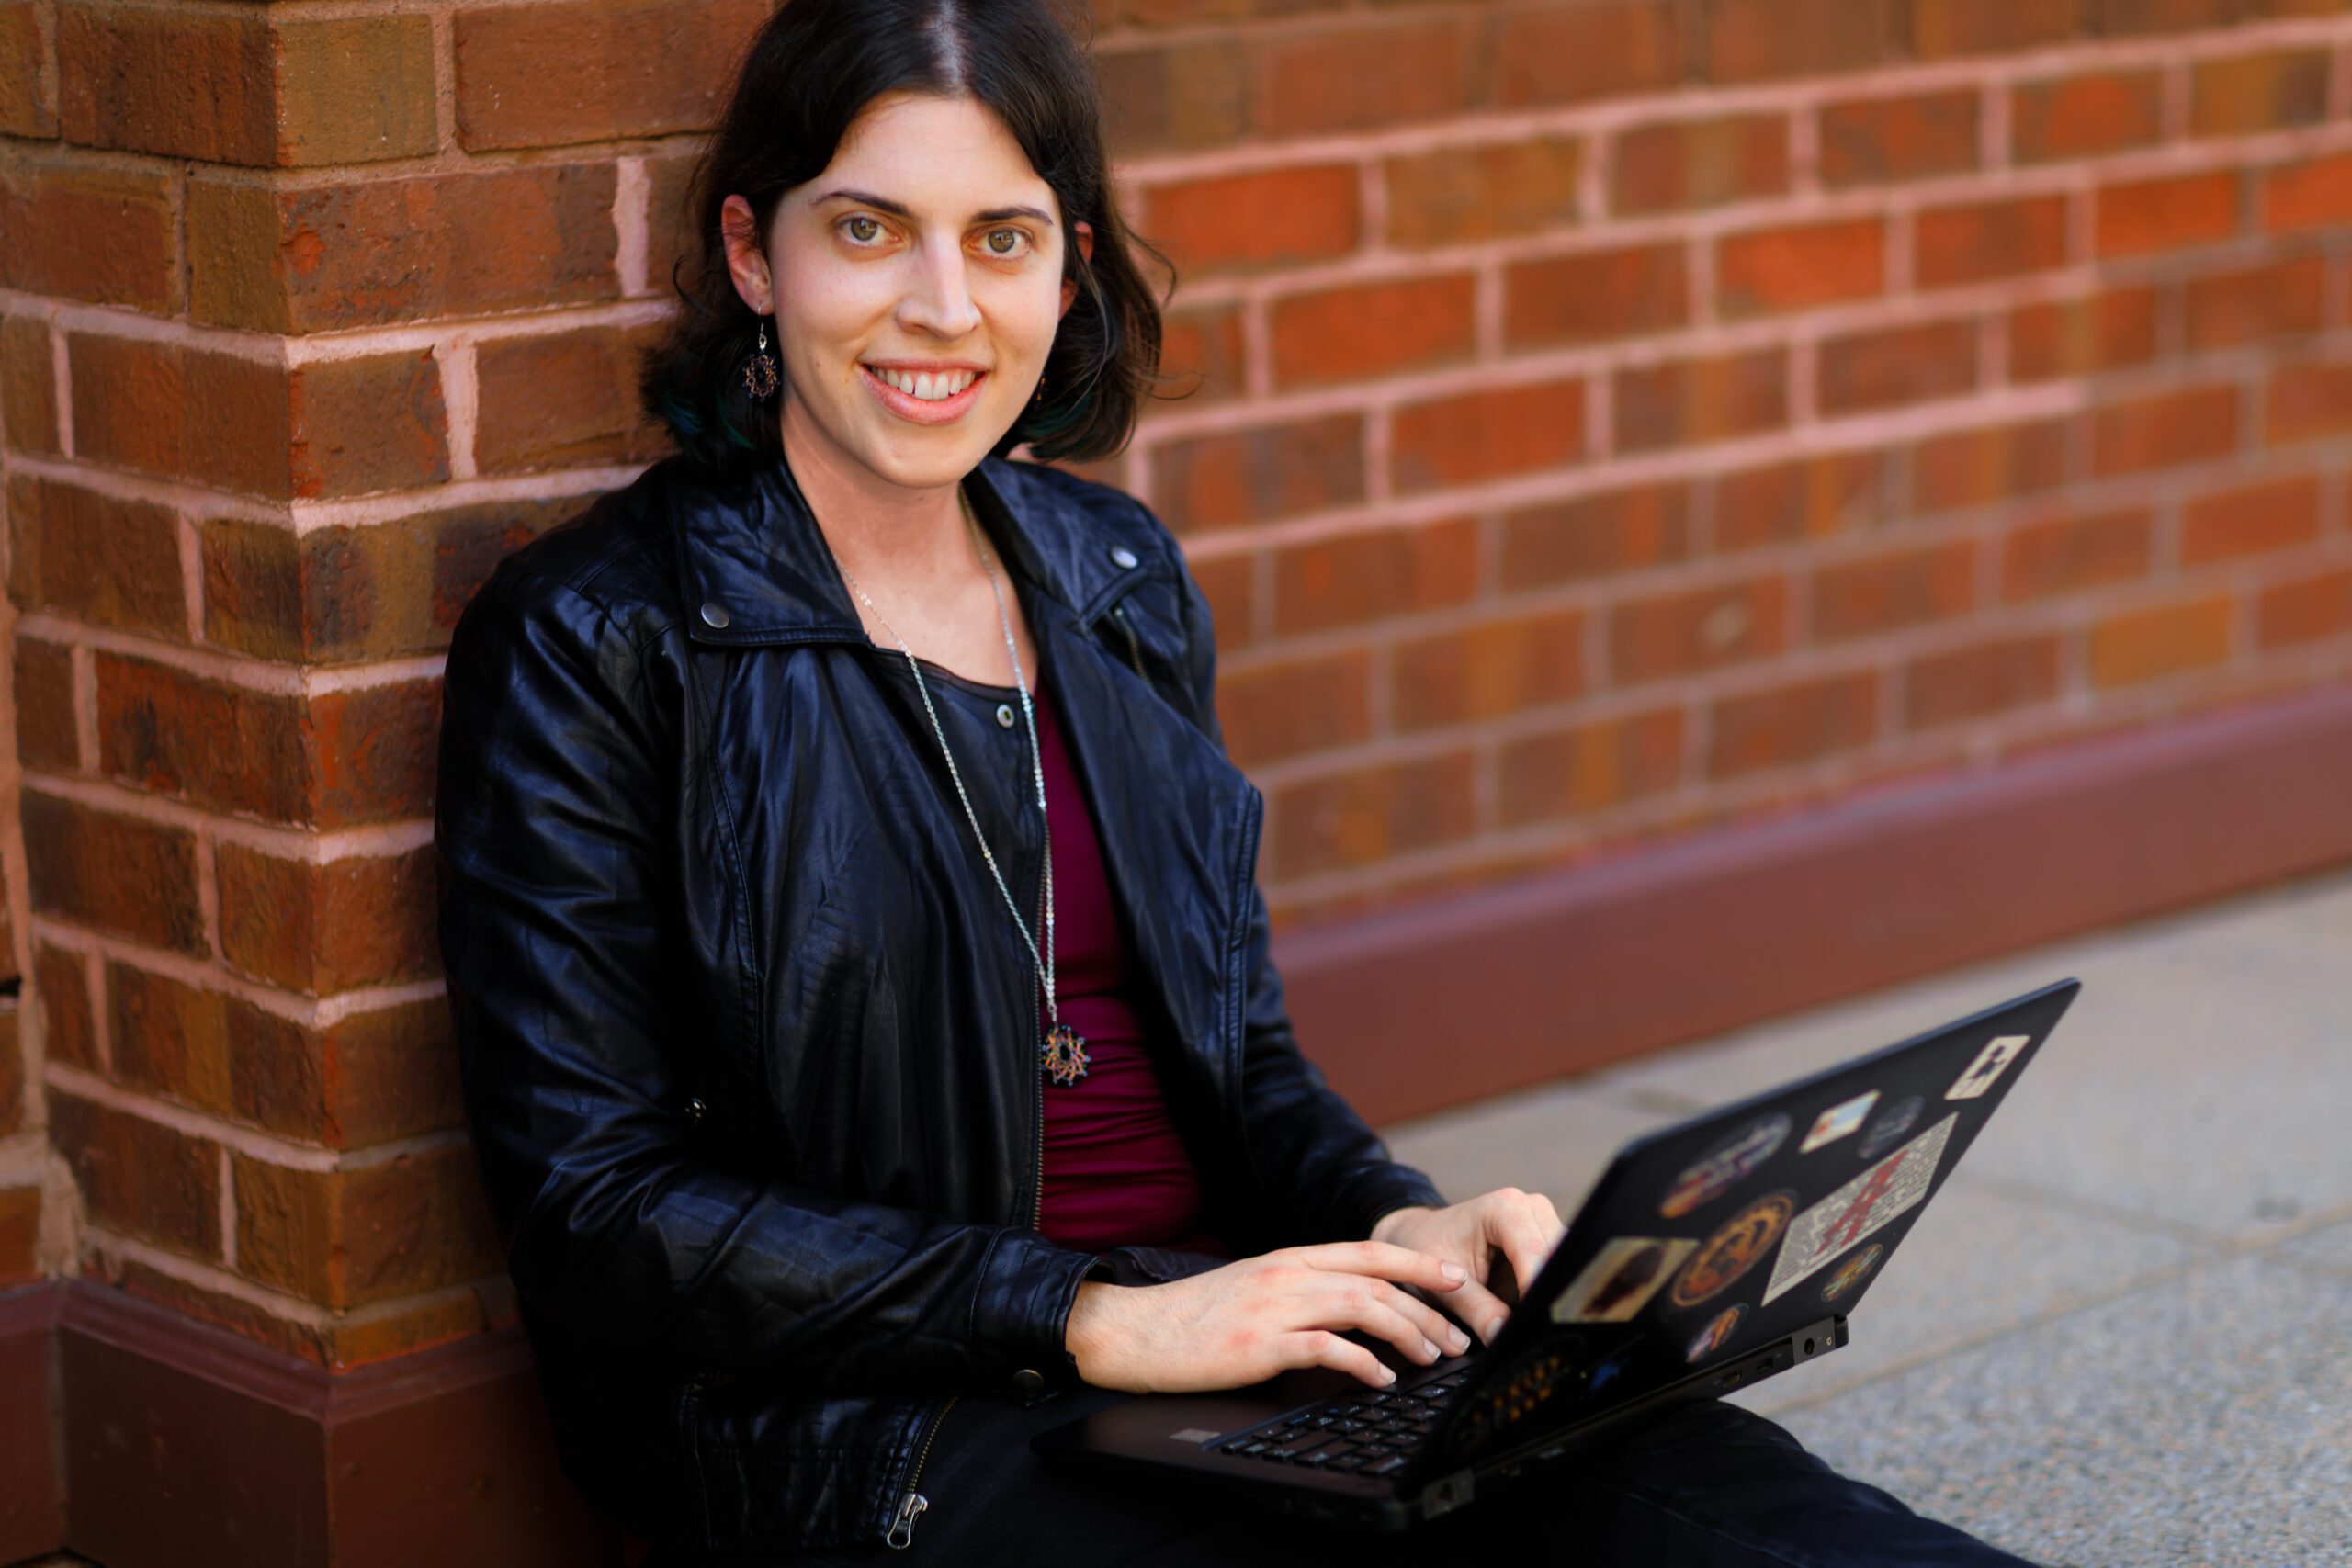 The image is of author coach and book business strategist Janeen Ippolito sitting on the ground and leading against a brick wall with her laptop in her lap. She's smiling at the viewer.